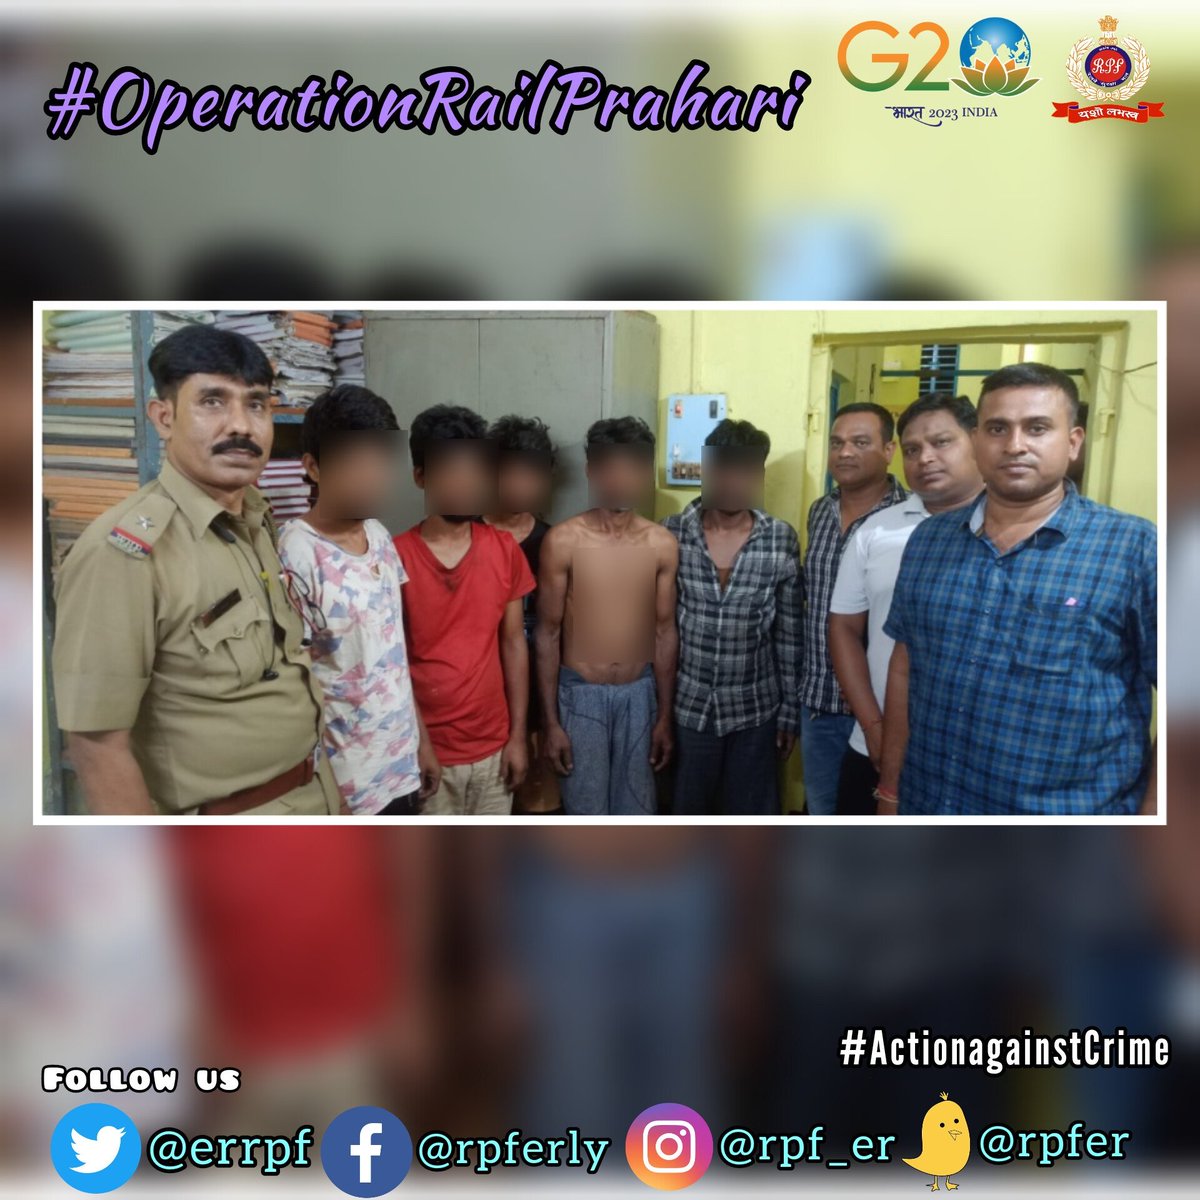 05 notorious criminals arrested....planning to attempt Dacoity with deadly weapons.
#OperationRailPrahari 
#Sentinelonrail 
@RPF_INDIA @RailMinIndia @EasternRailway